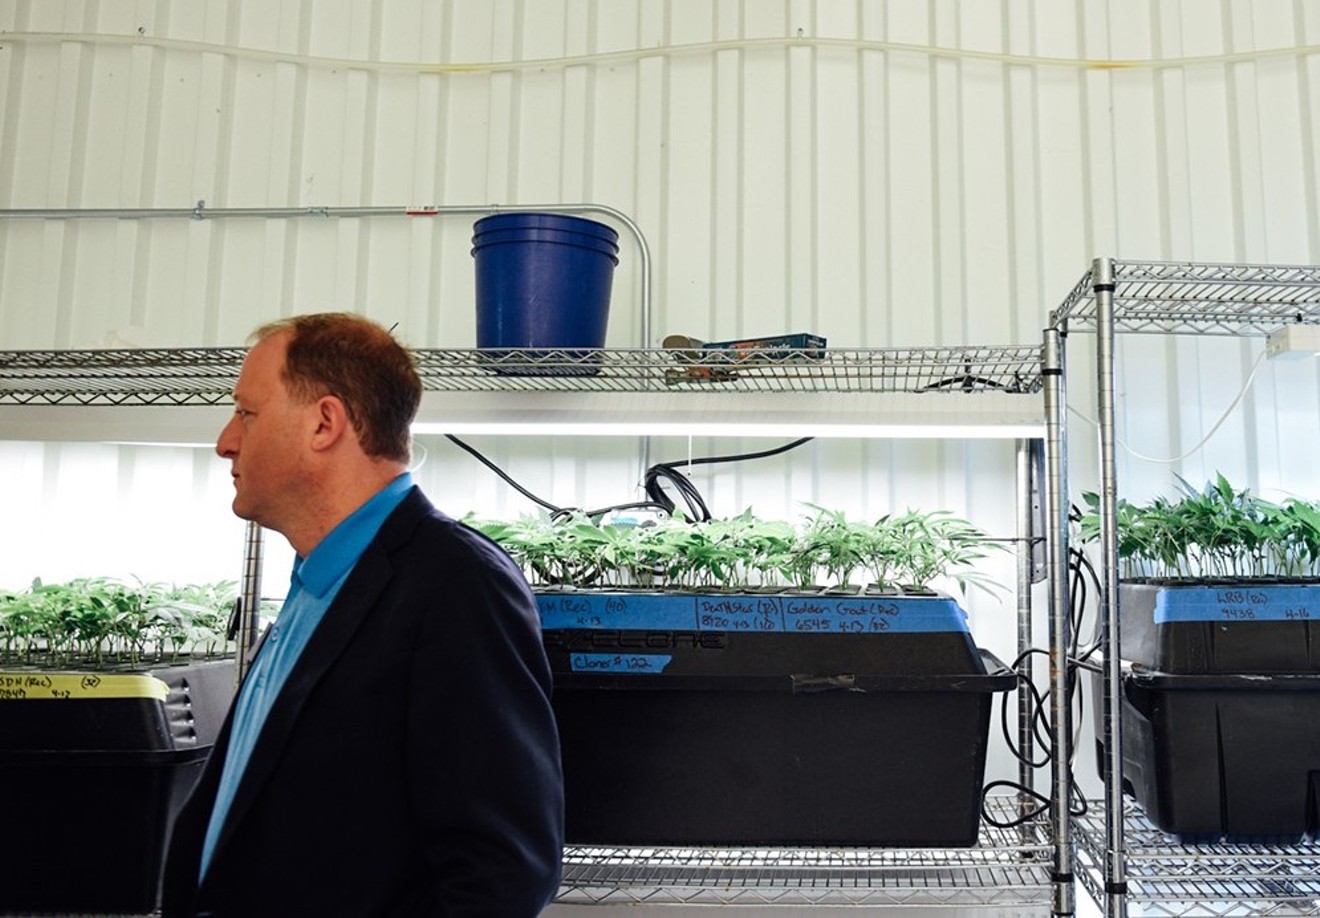 Governor Jared Polis tours a commercial marijuana grow during his days as a congressman in 2018.